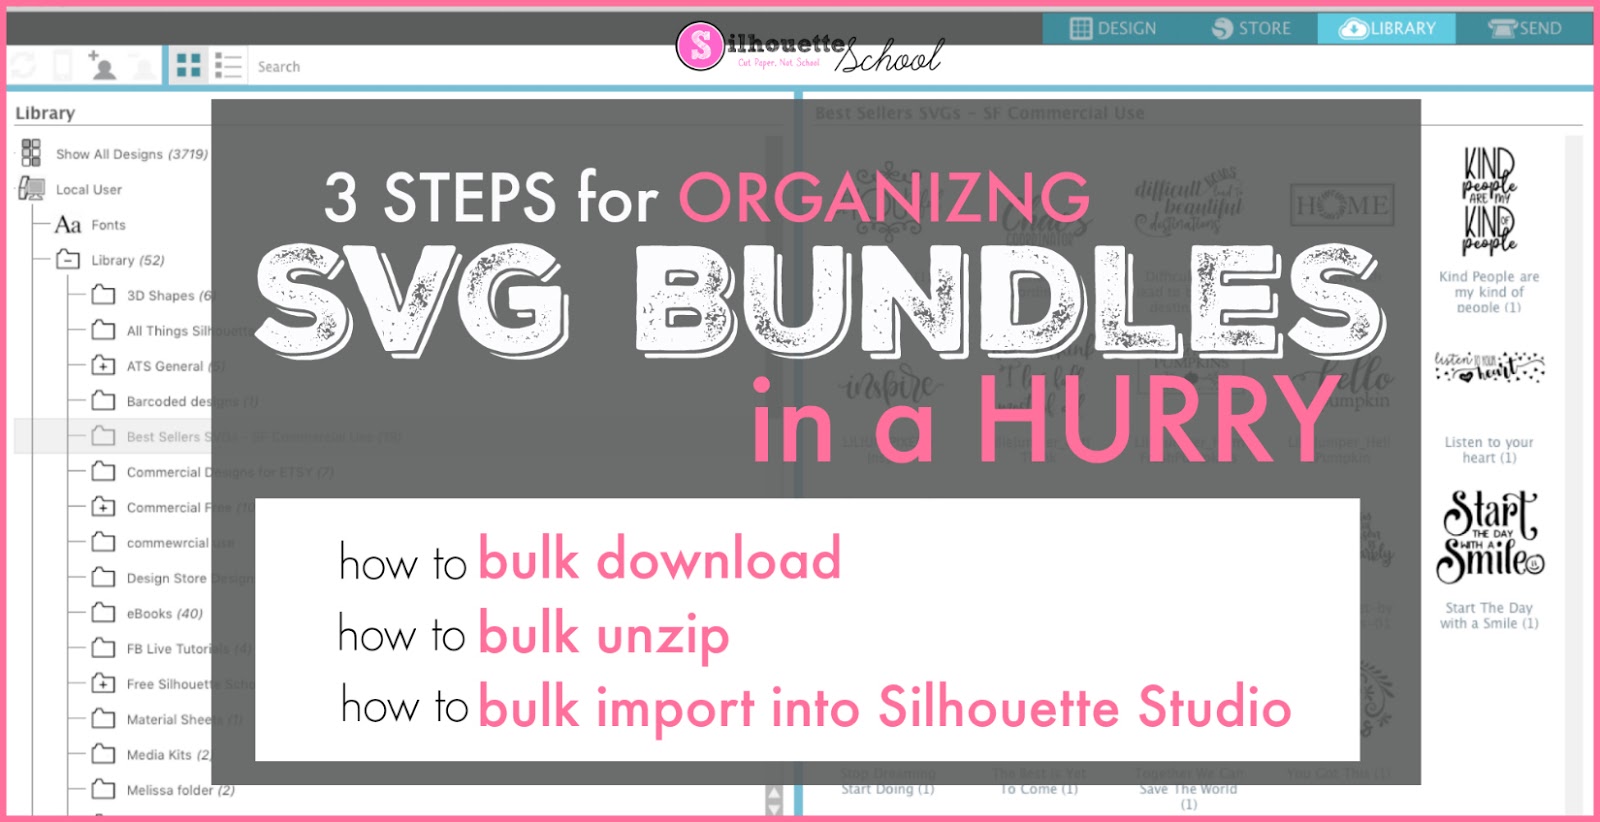 Download How To Organize Svg Bundles 3 Steps To Bulk Download Unzip And Import Into Silhouette Studio Video Tutorial Silhouette School PSD Mockup Templates